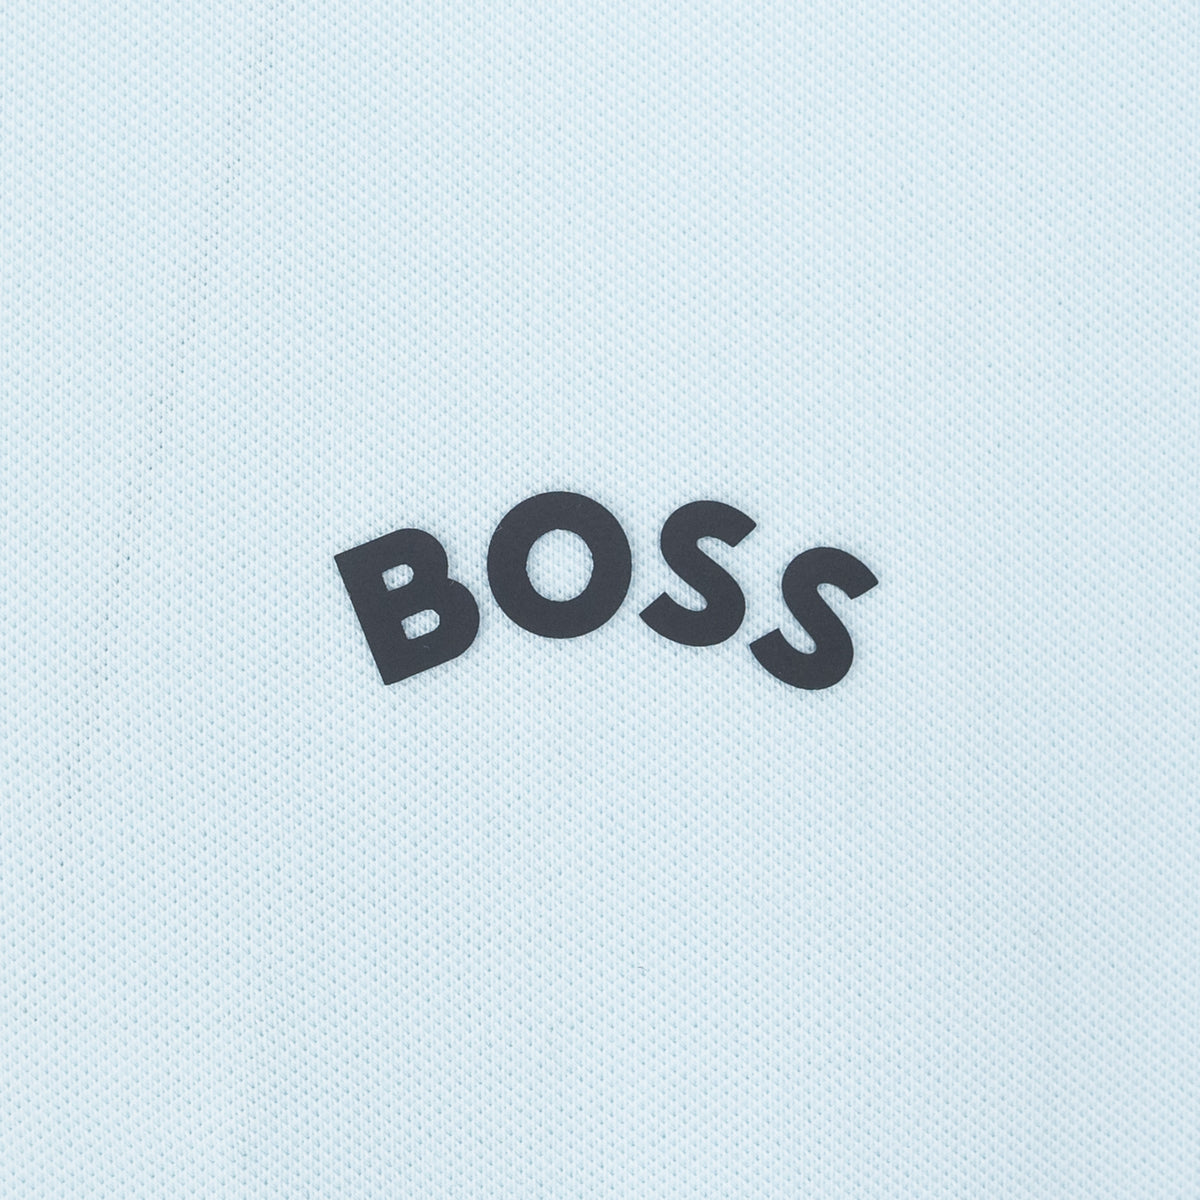 Load image into Gallery viewer, BOSS Sky Paul Curved Logo Polo
